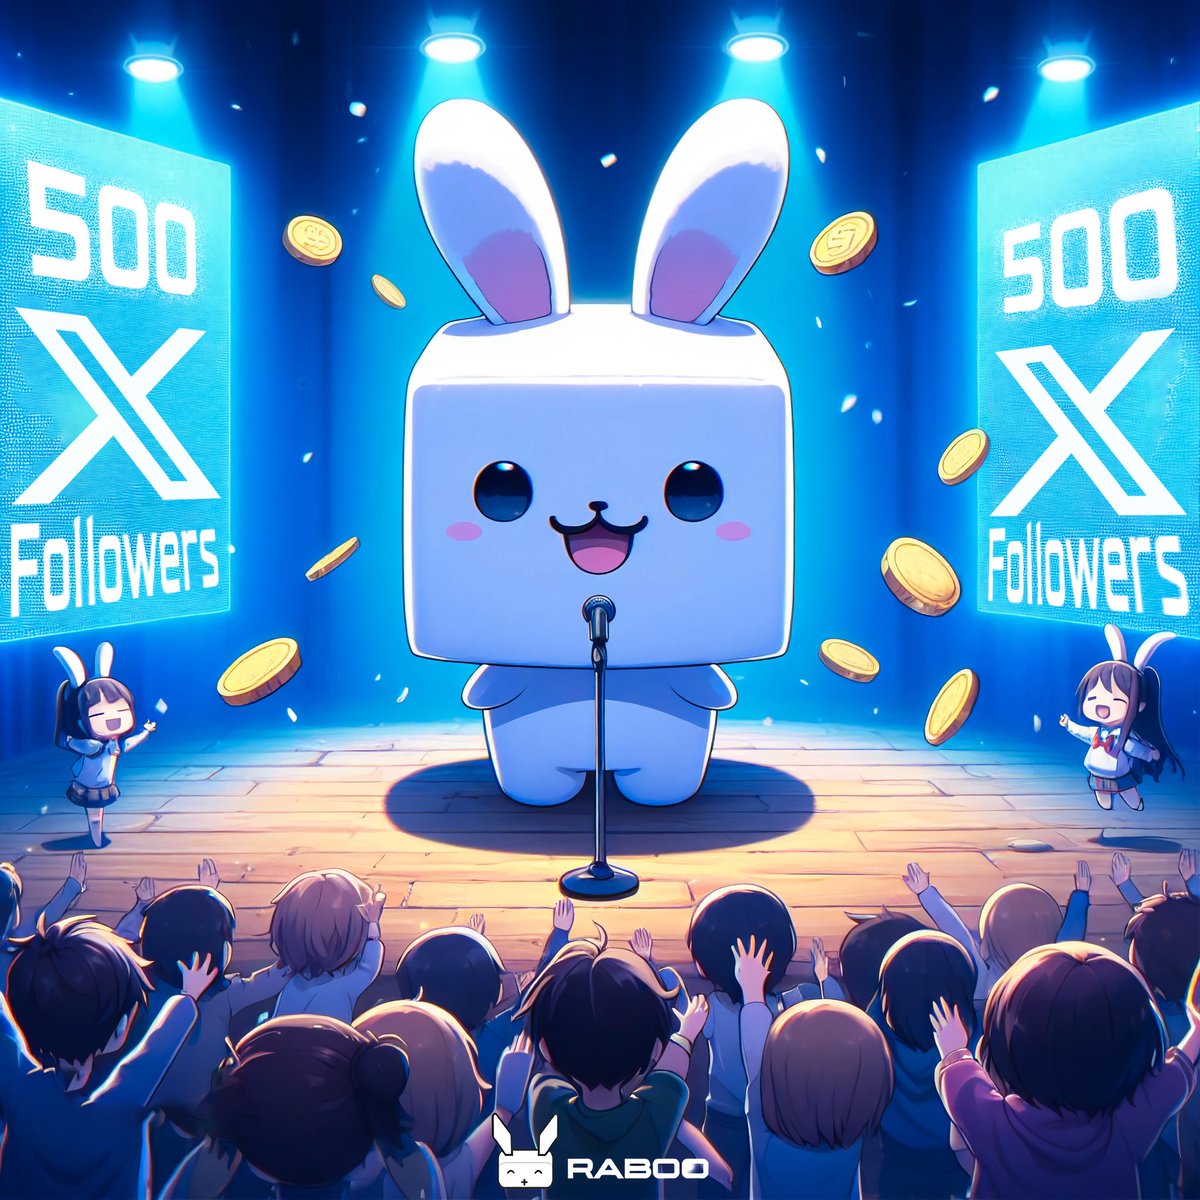 RABOO has just hit 500 followers on X. To celebrate, we’re giving away 40,000 $RABT to 2 followers; 20,000 $RABT each To participate; 1⃣ Follow @Raboo_official 2⃣ Like every post 3⃣ Quote Retweet: say something nice about $RABT 4⃣ Tag 3 friends Winners will be randomly